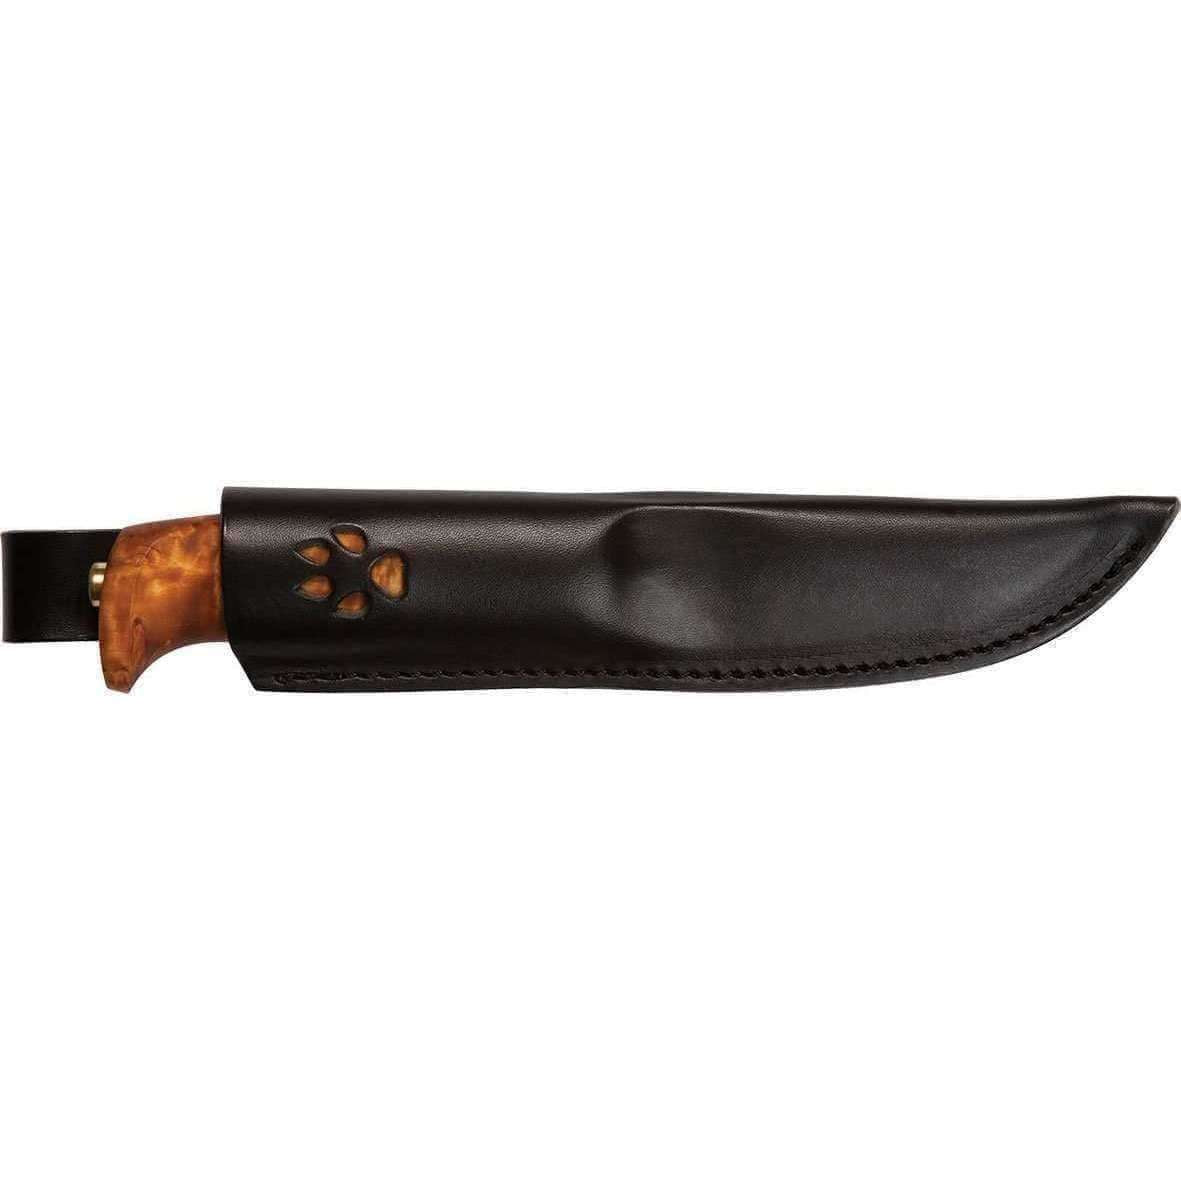 Helle, Helle Gaupe Knife, Bushcraft Fixed Blade Knives, Wylies Outdoor World,